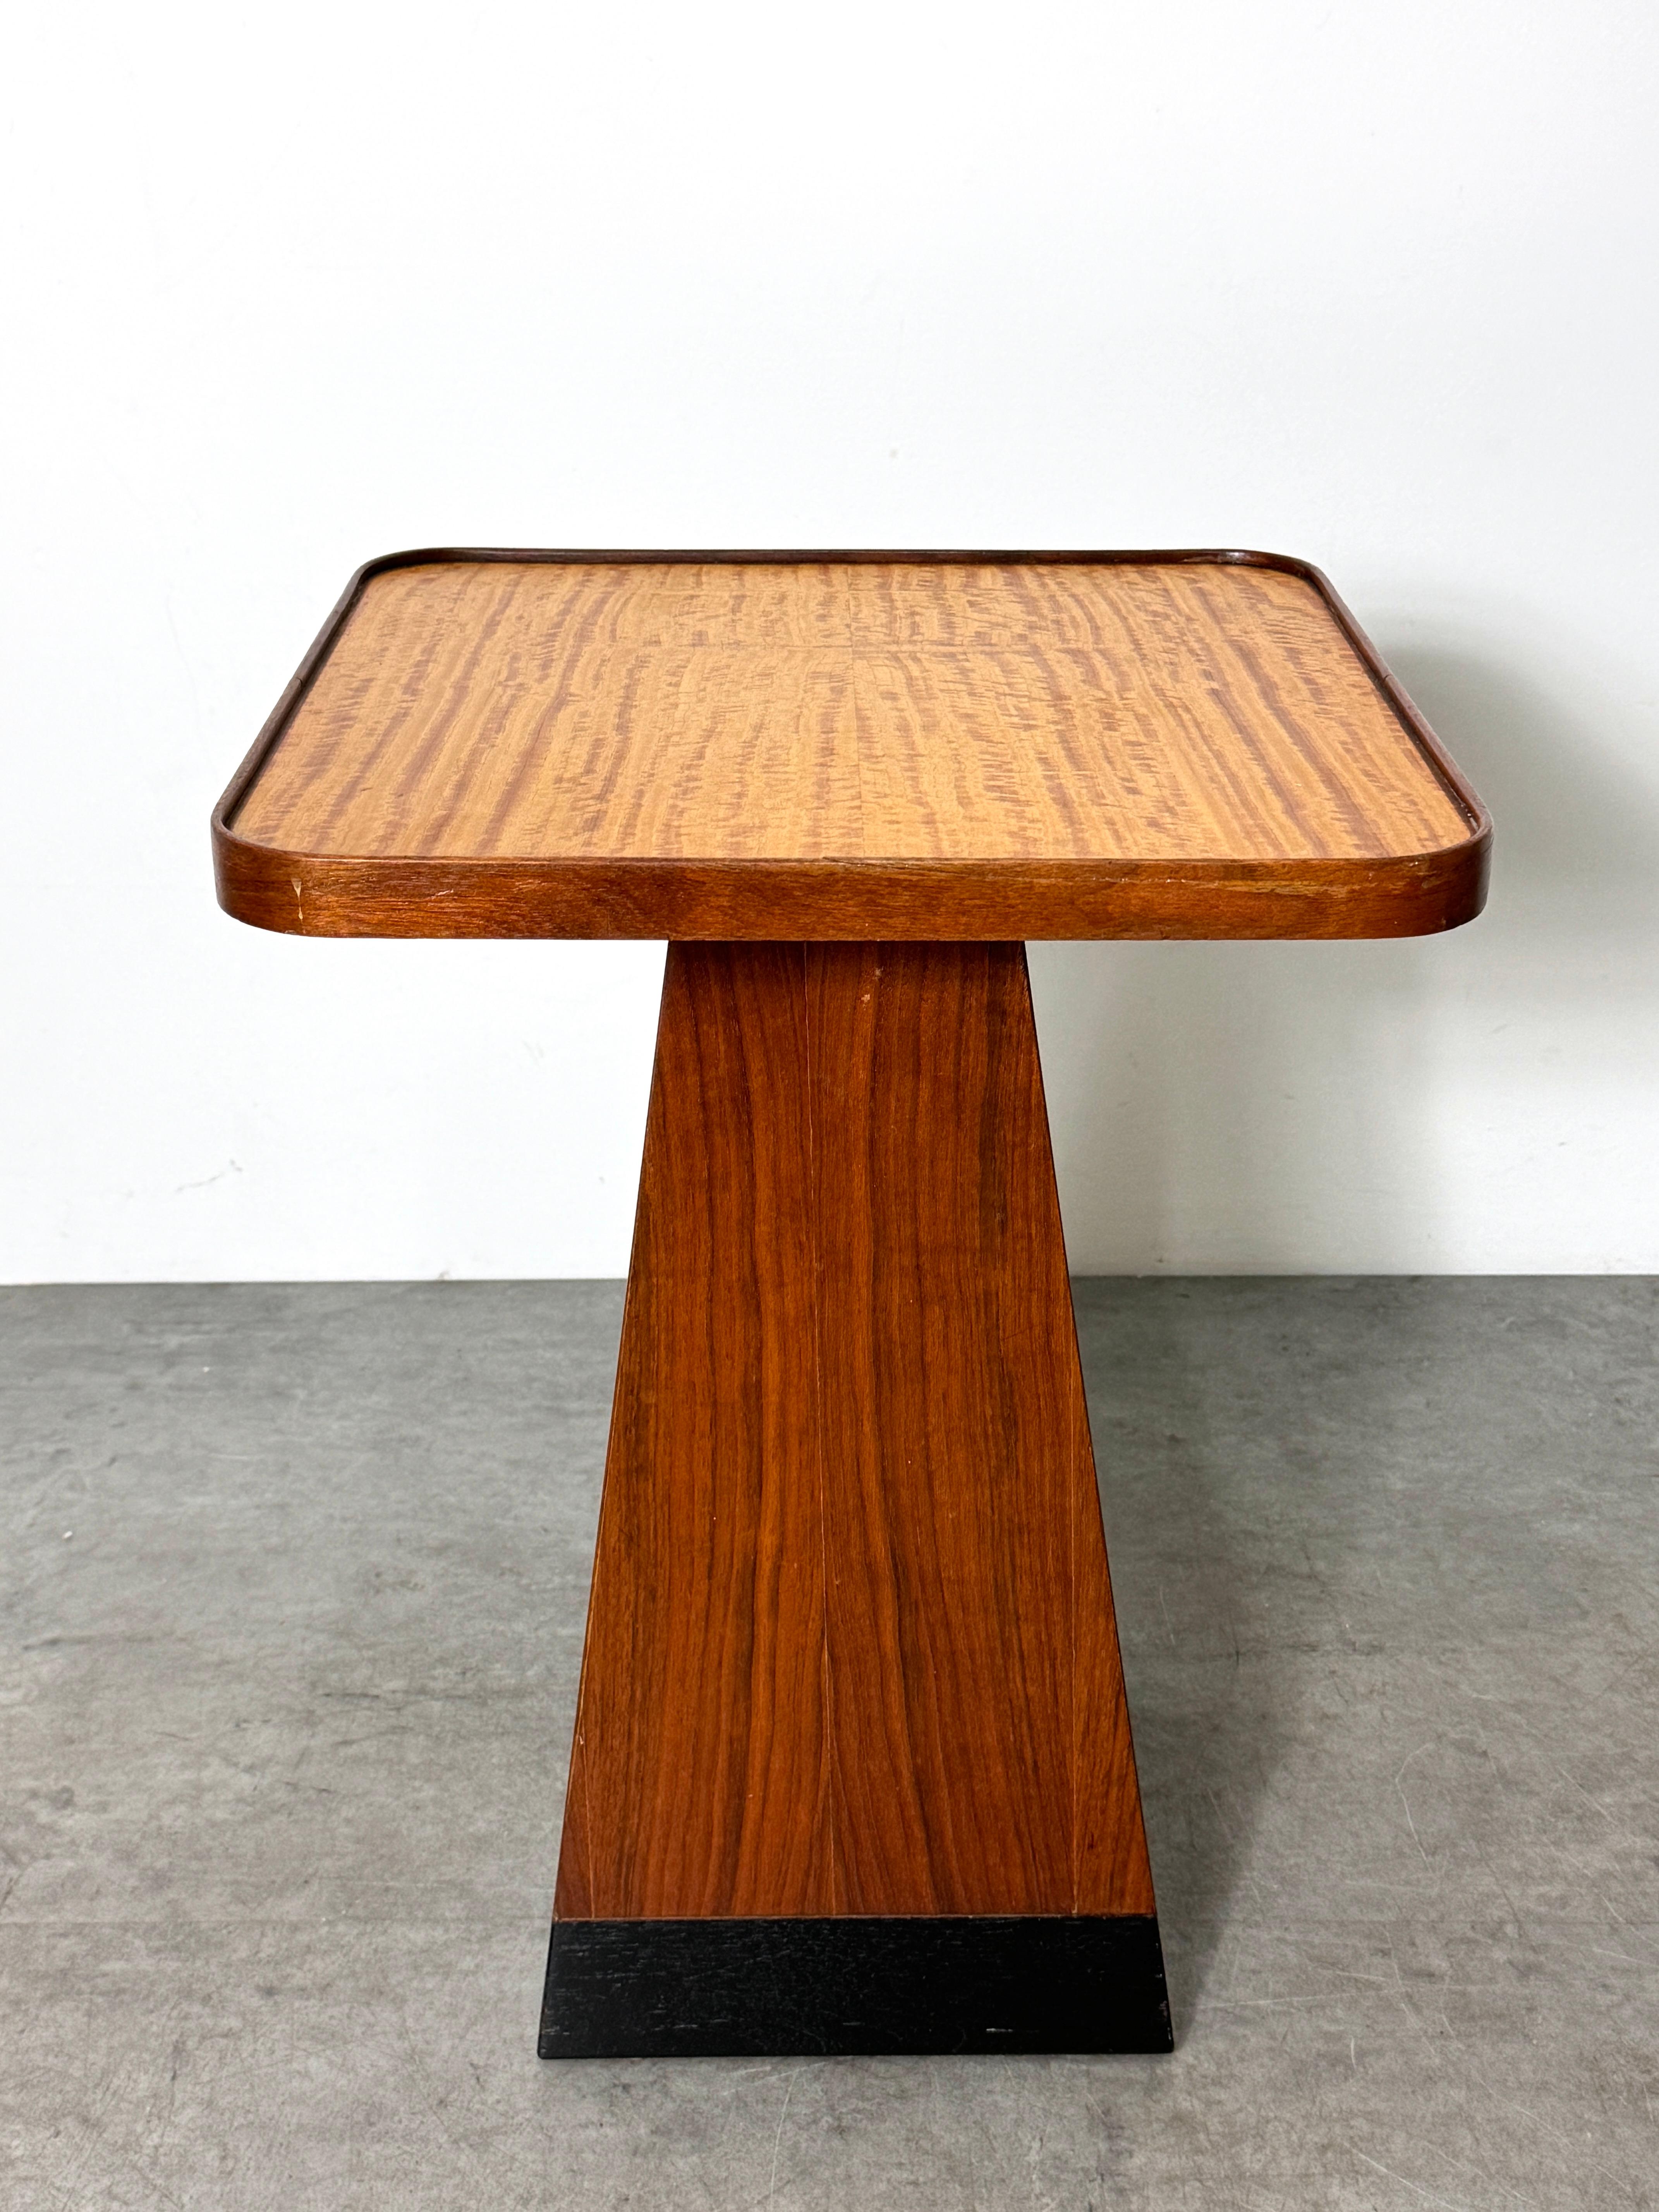 Unique vintage occasional table circa 1970s
Architectural design with walnut and ebonized wood pyramid base and square top with inset satinwood surface
Unsigned / In the style of Harvey Probber

16 x 16 inches
21.25 inch height

